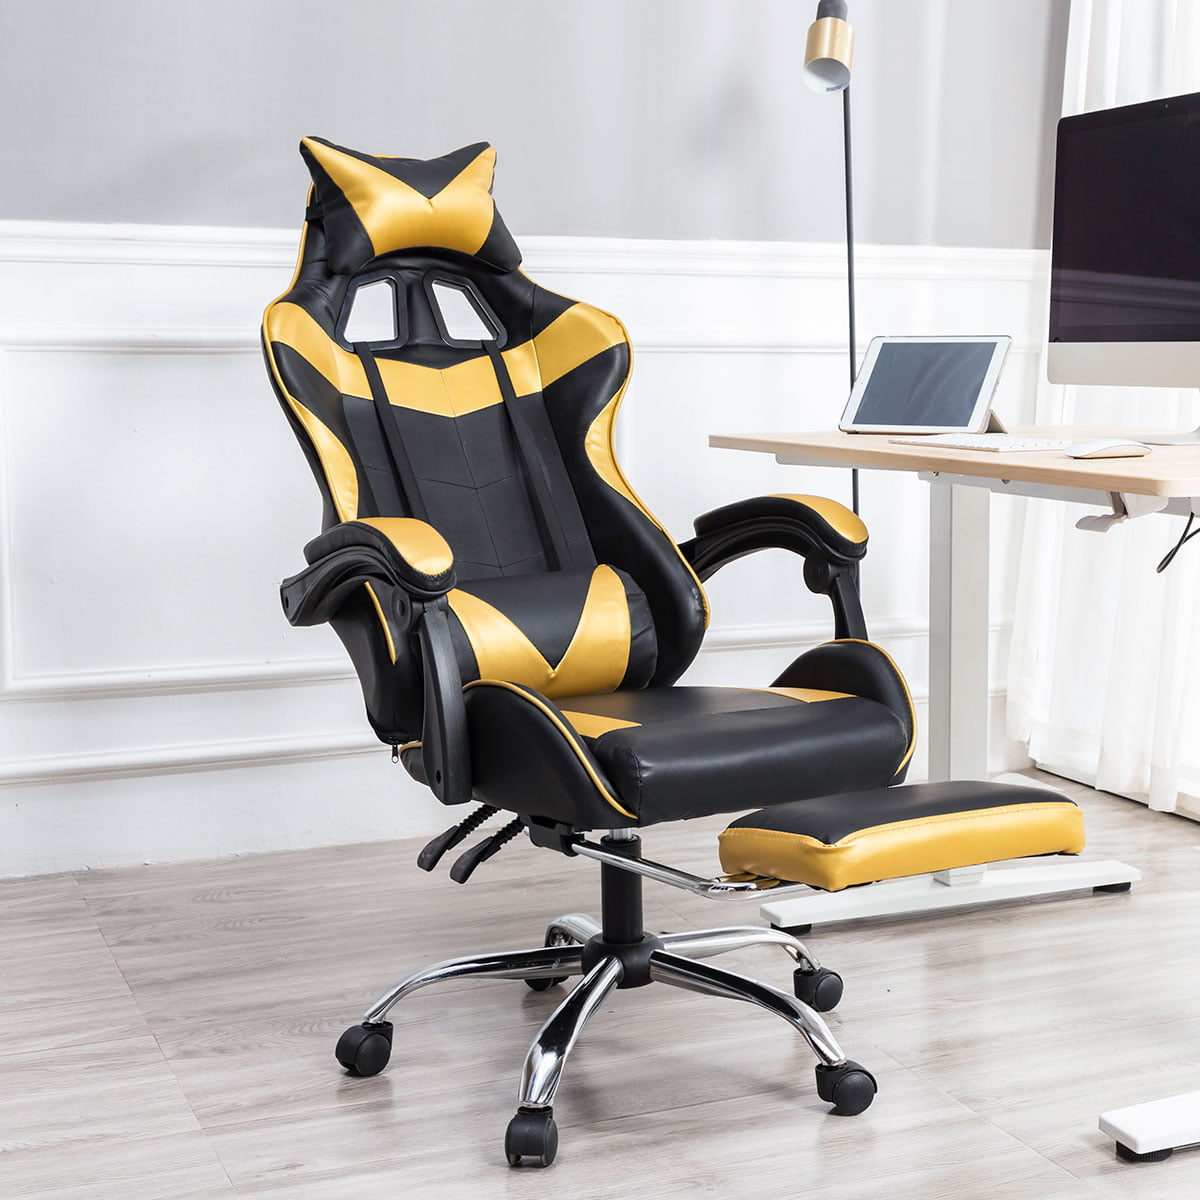 Details about   Gaming Chair Racing Seat Swivel Footrest Ergonomic Recliner Office Computer Desk 